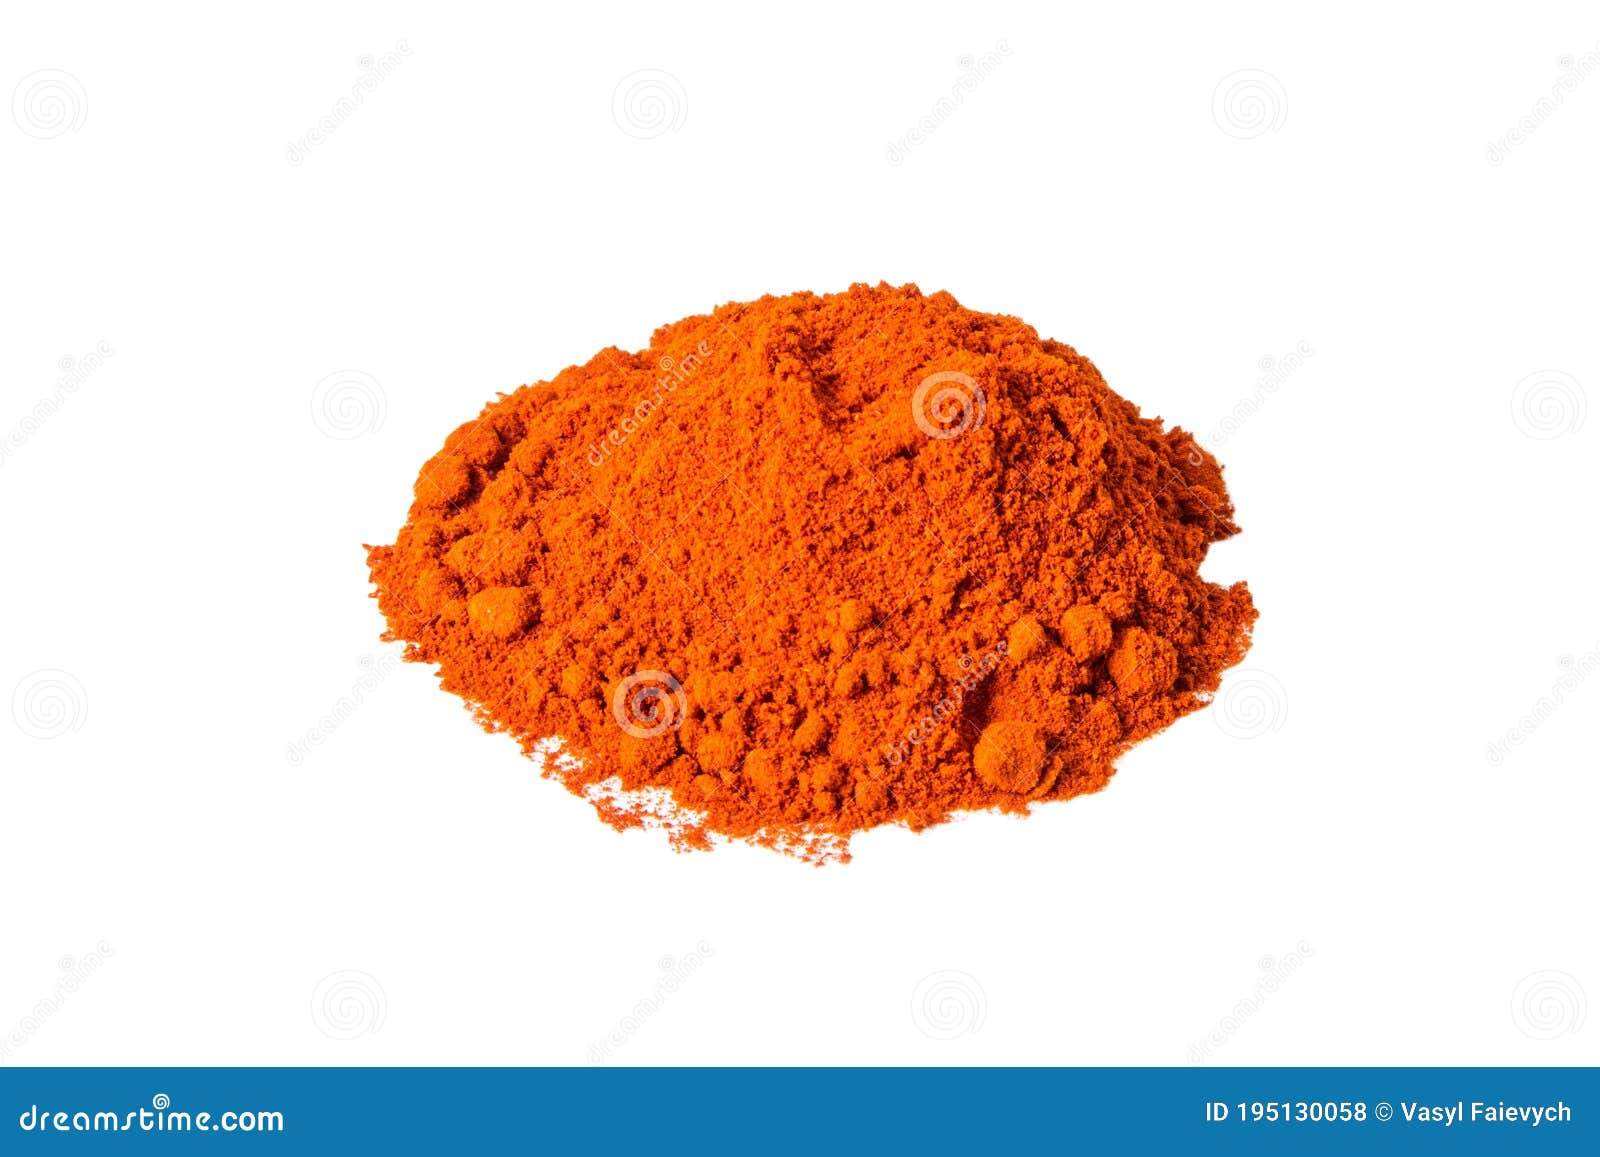 smoked paprika  on a white background. front views, close-up